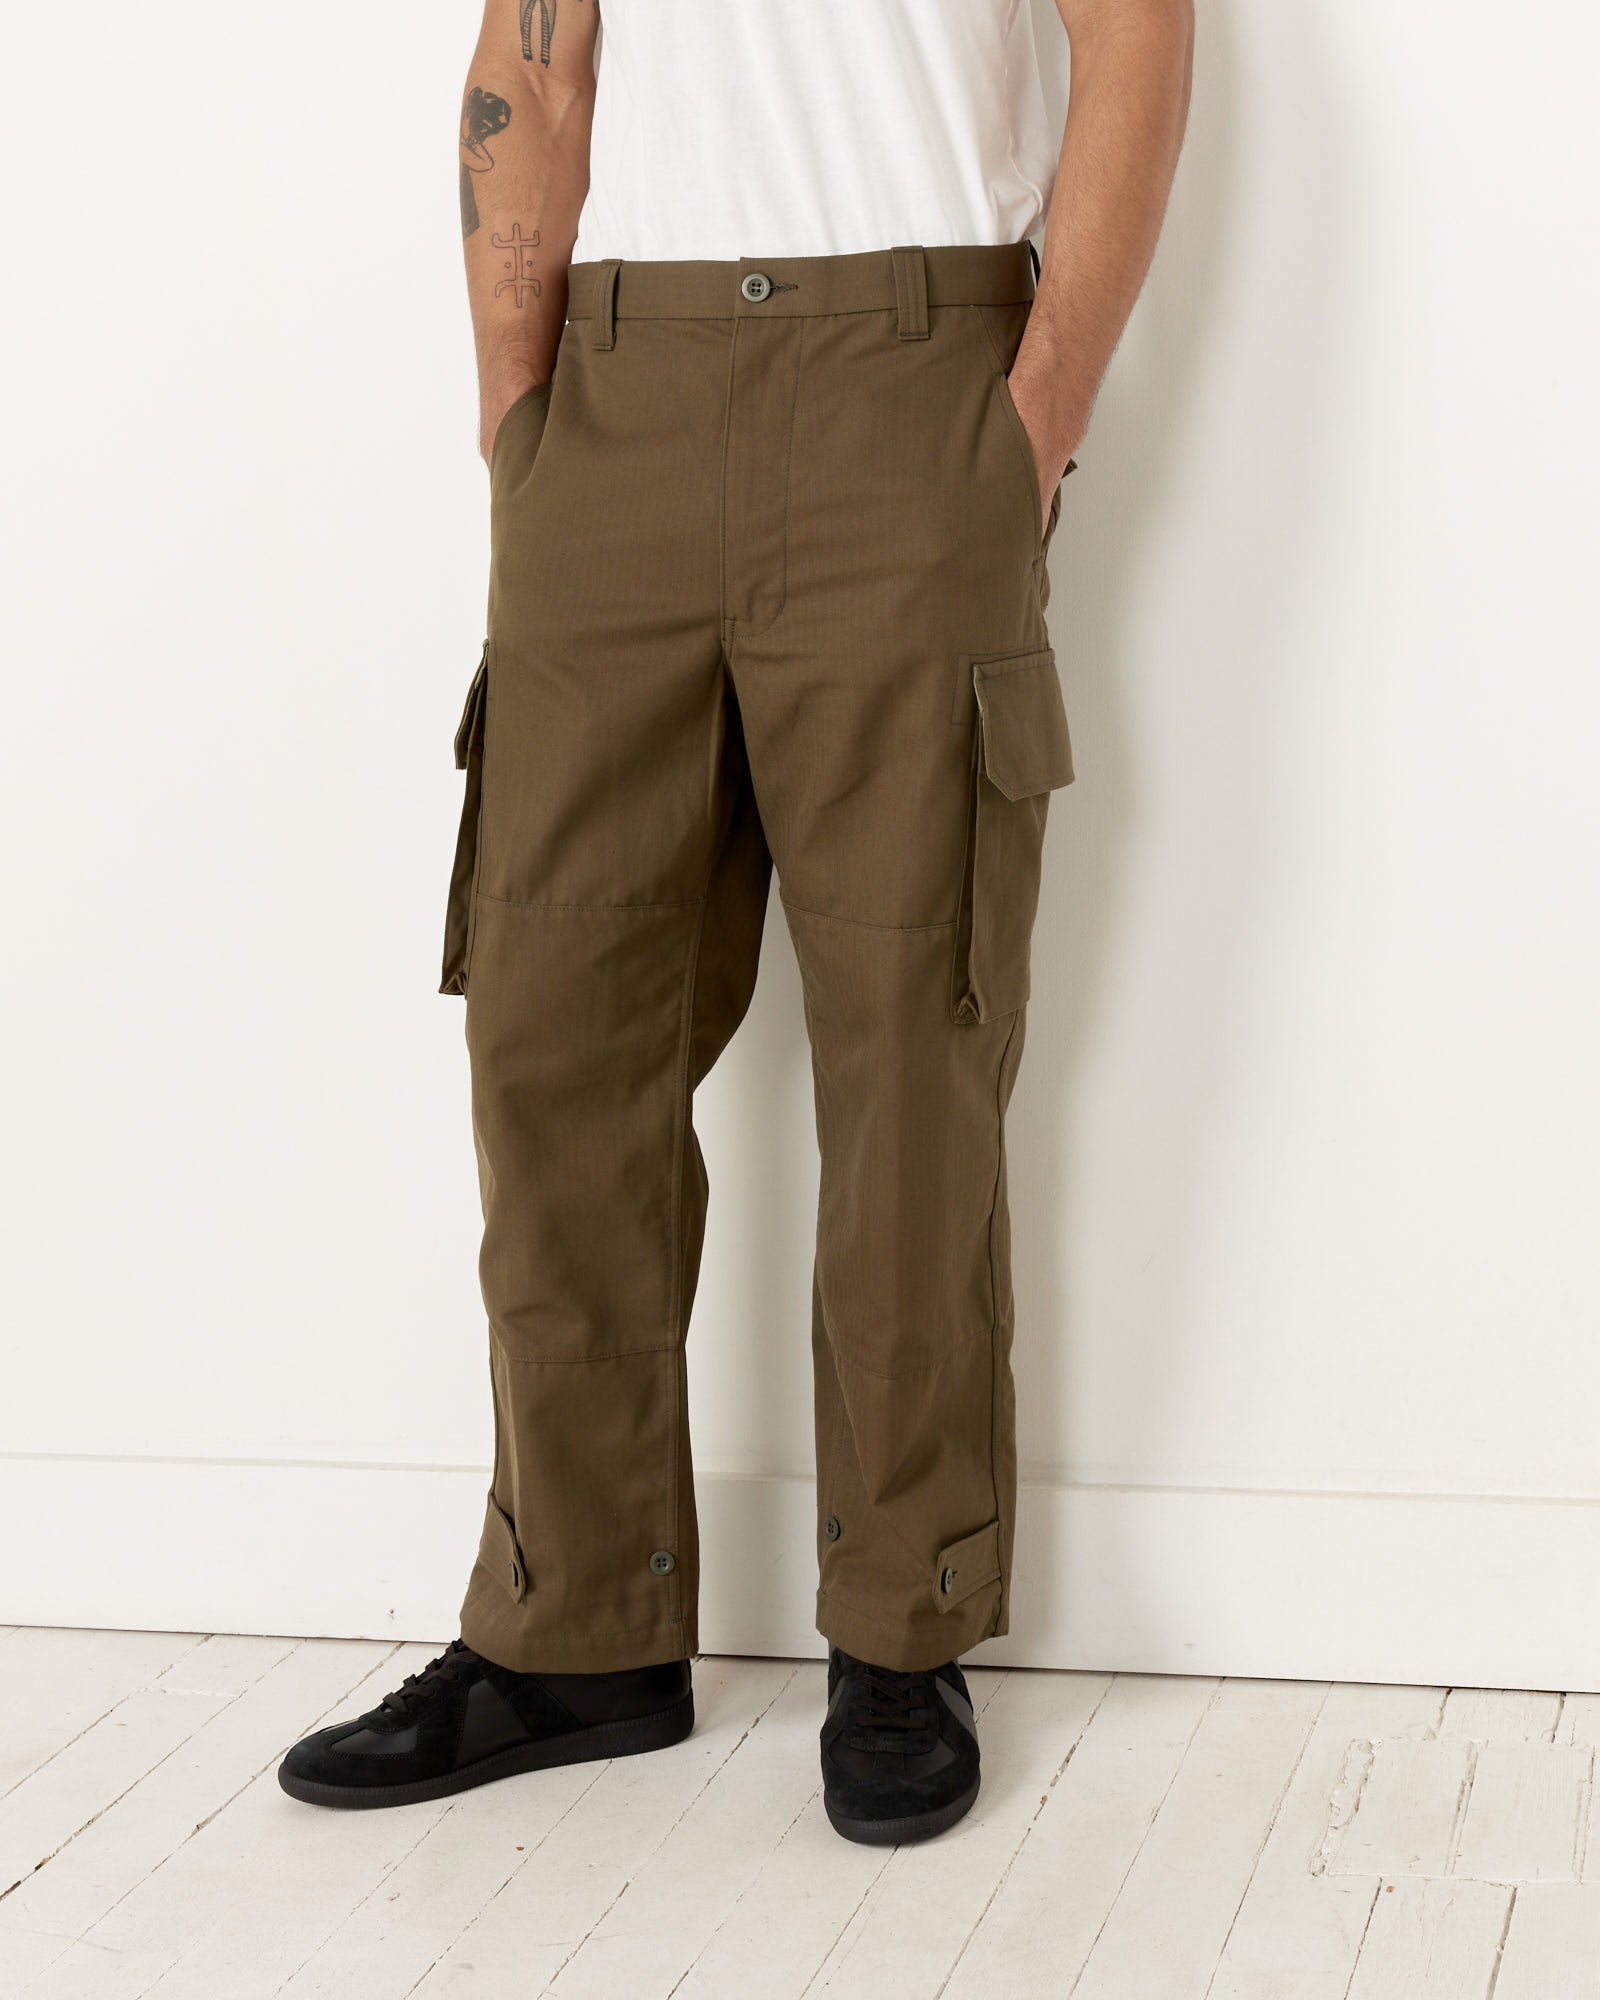 Pants in Olive